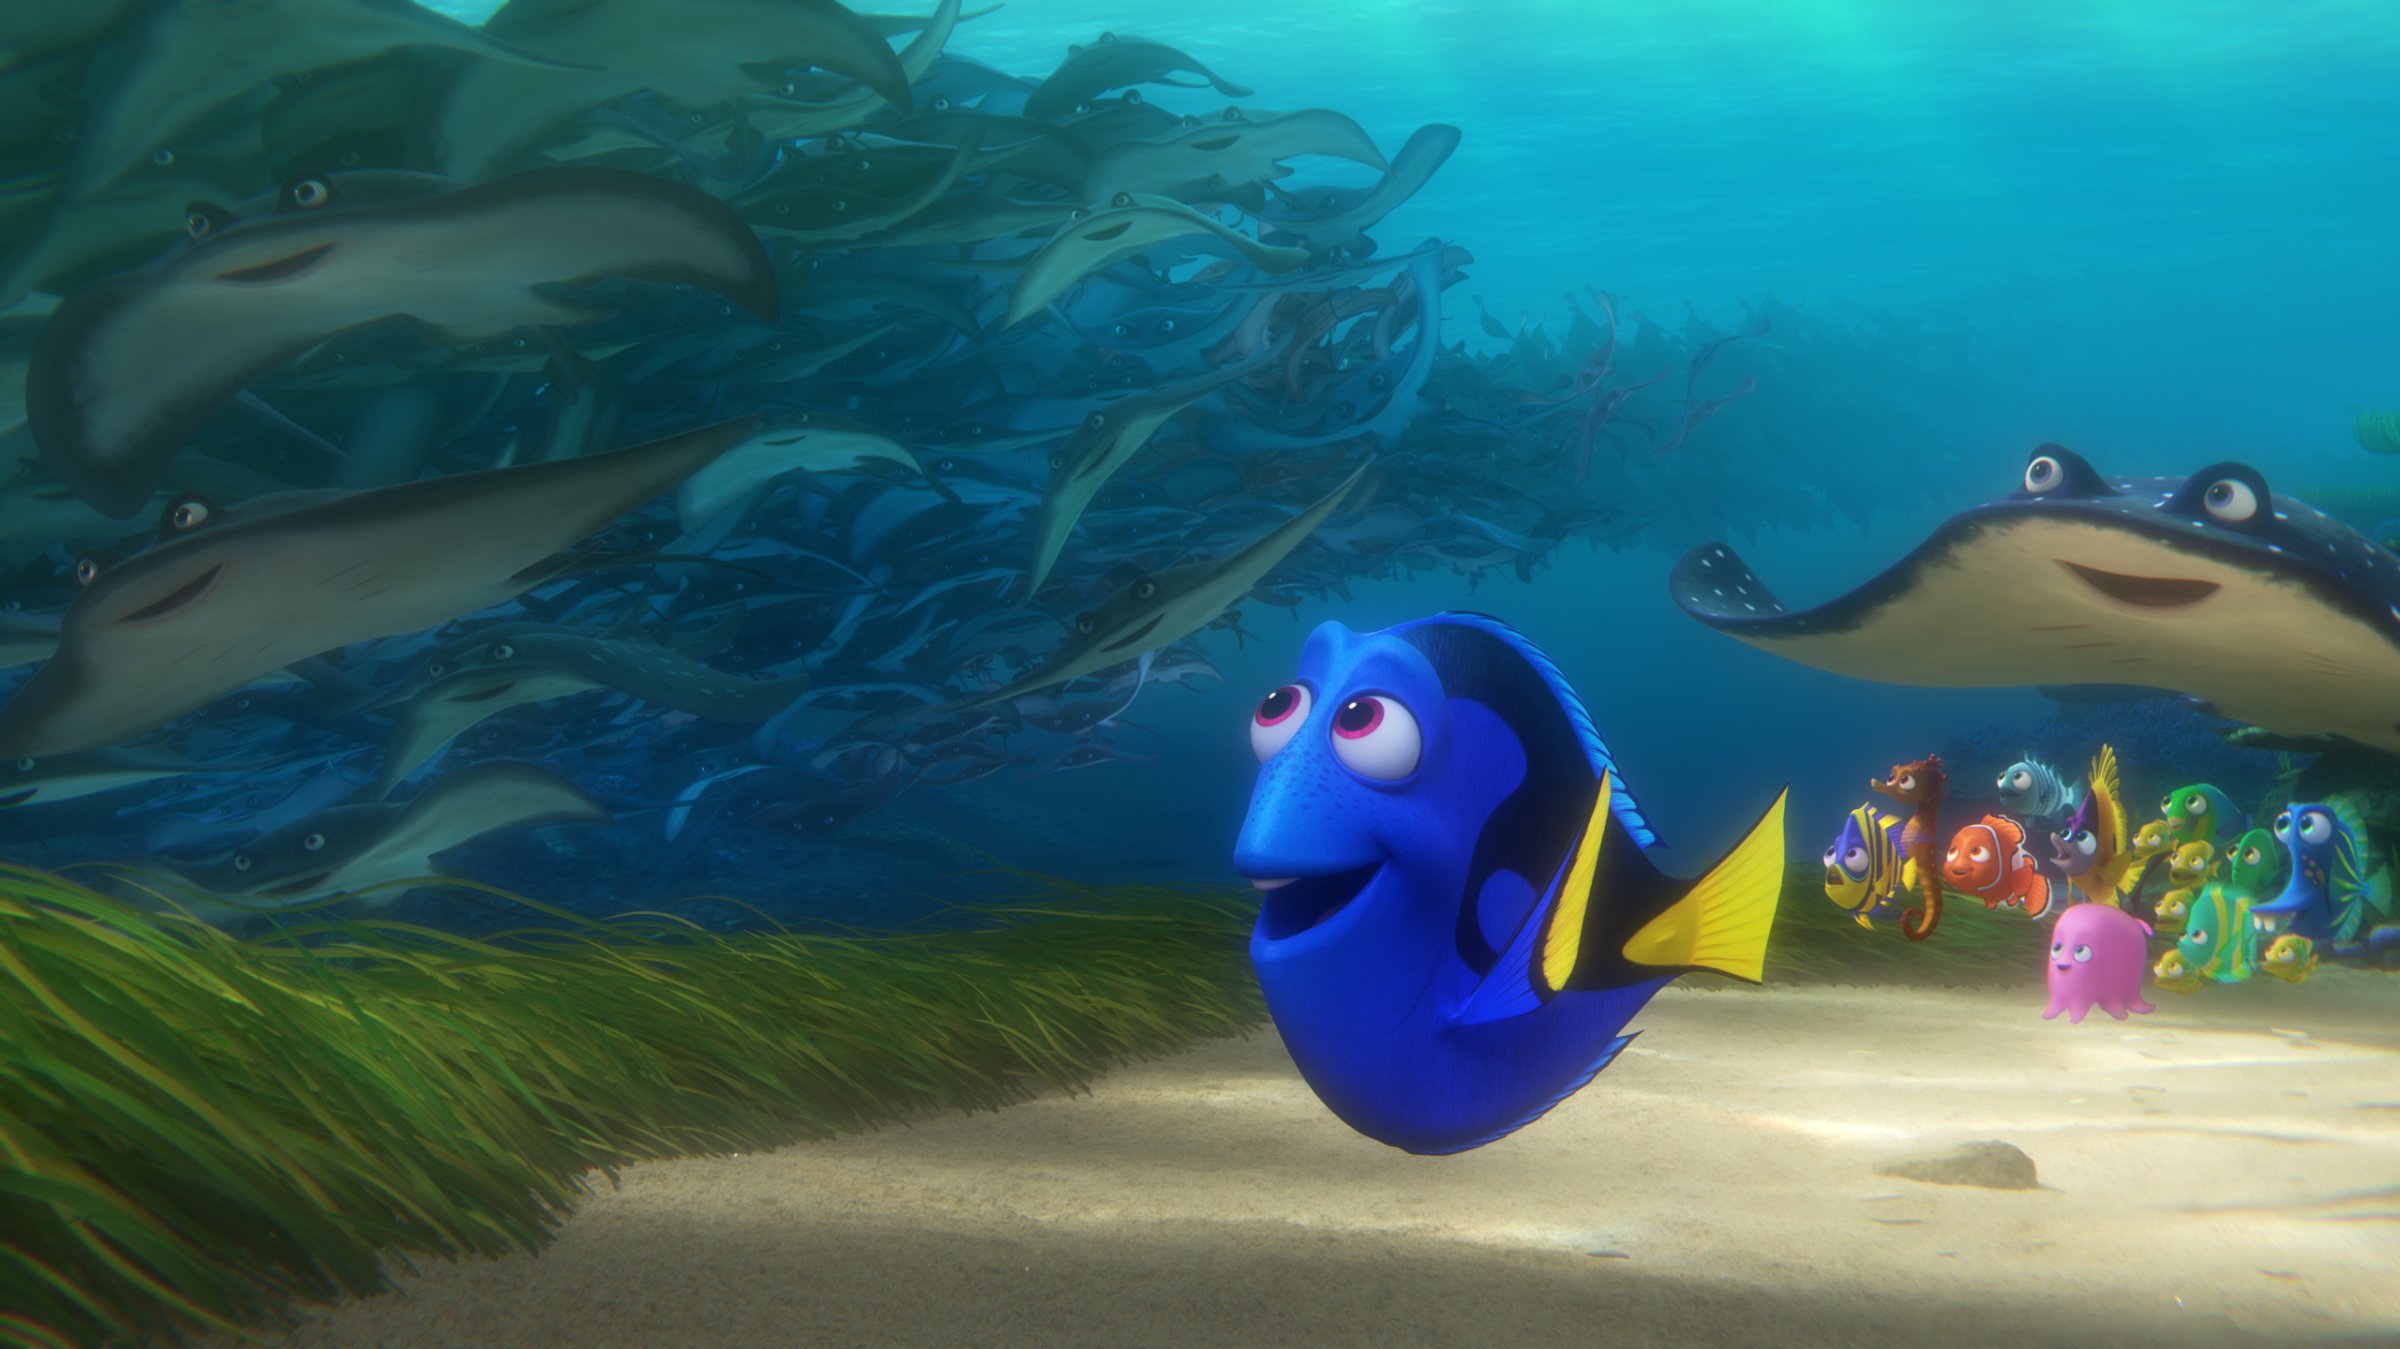 In "Finding Dory," memories of her past are sparked for forgetful blue tang Dory when a stingray migration whizzes by her.